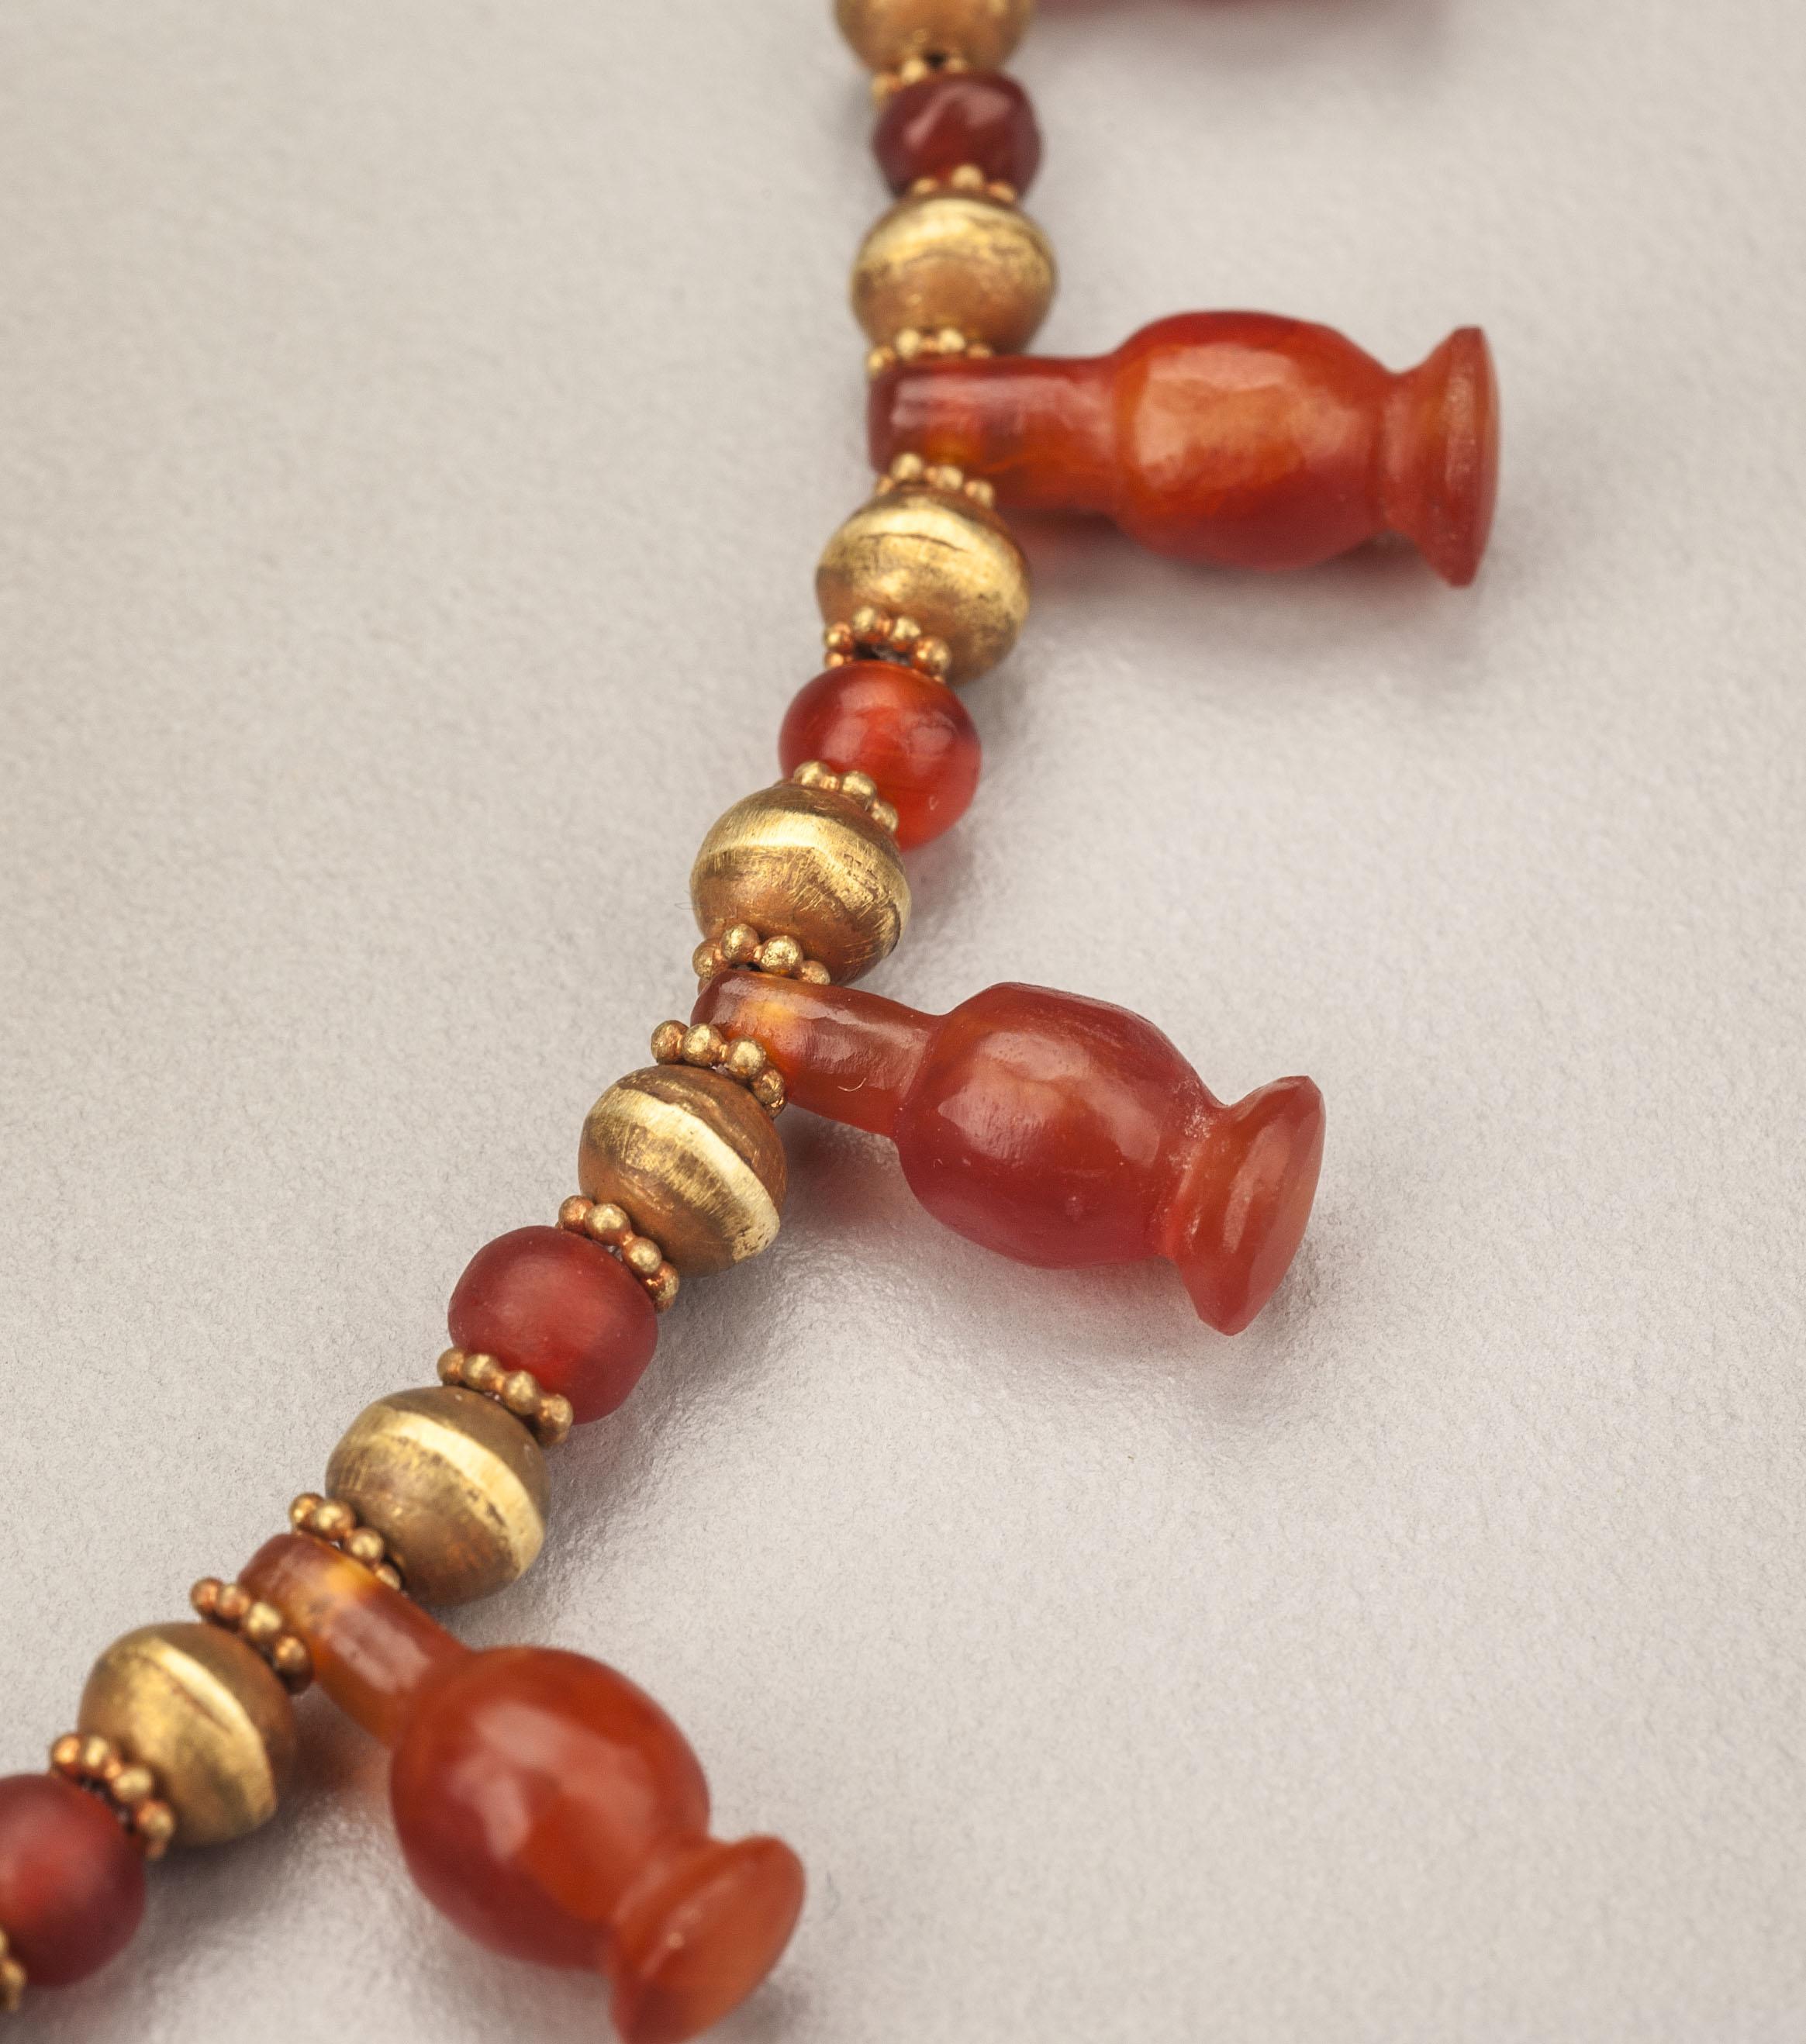 Thirty ancient Egyptian carnelian poppy seed pods pendant beads, faced with gold granulated ring beads, and alternating with round carnelian beads also faced with gold granulated ring beads; with gold round beads alternating between the carnelian